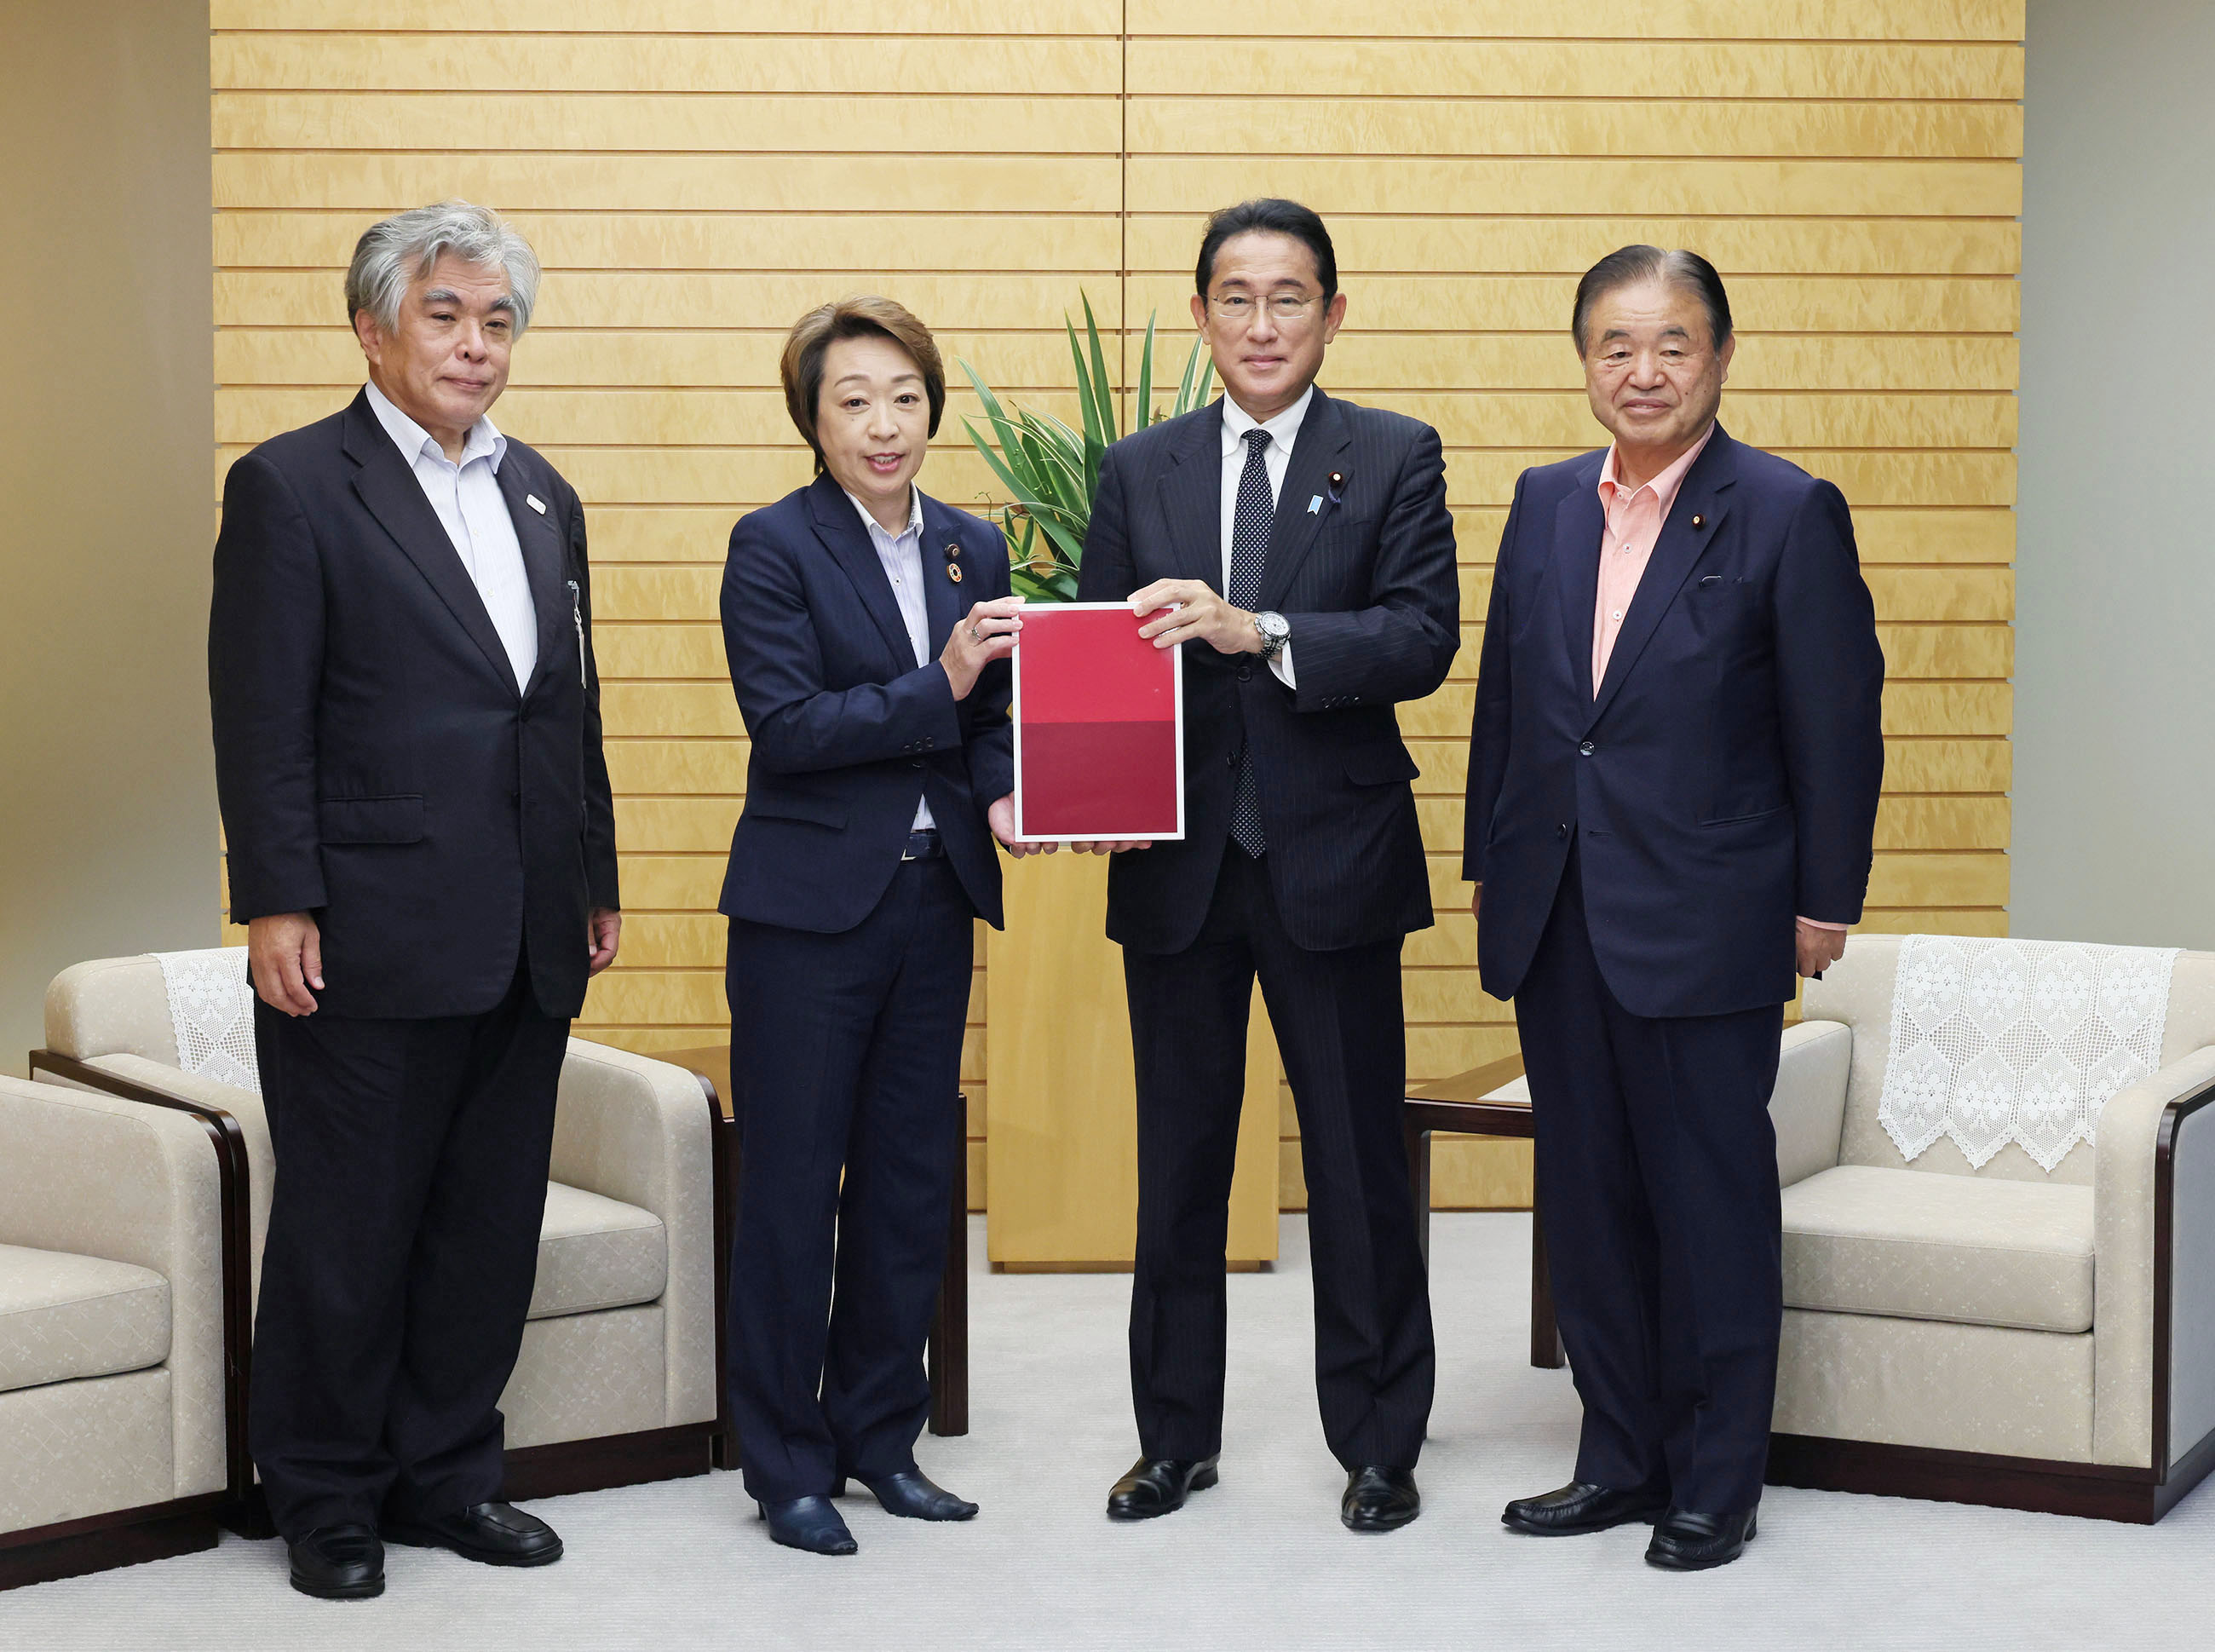 Courtesy Call from Former President of the Tokyo Organising Committee of the Olympic and Paralympic Games